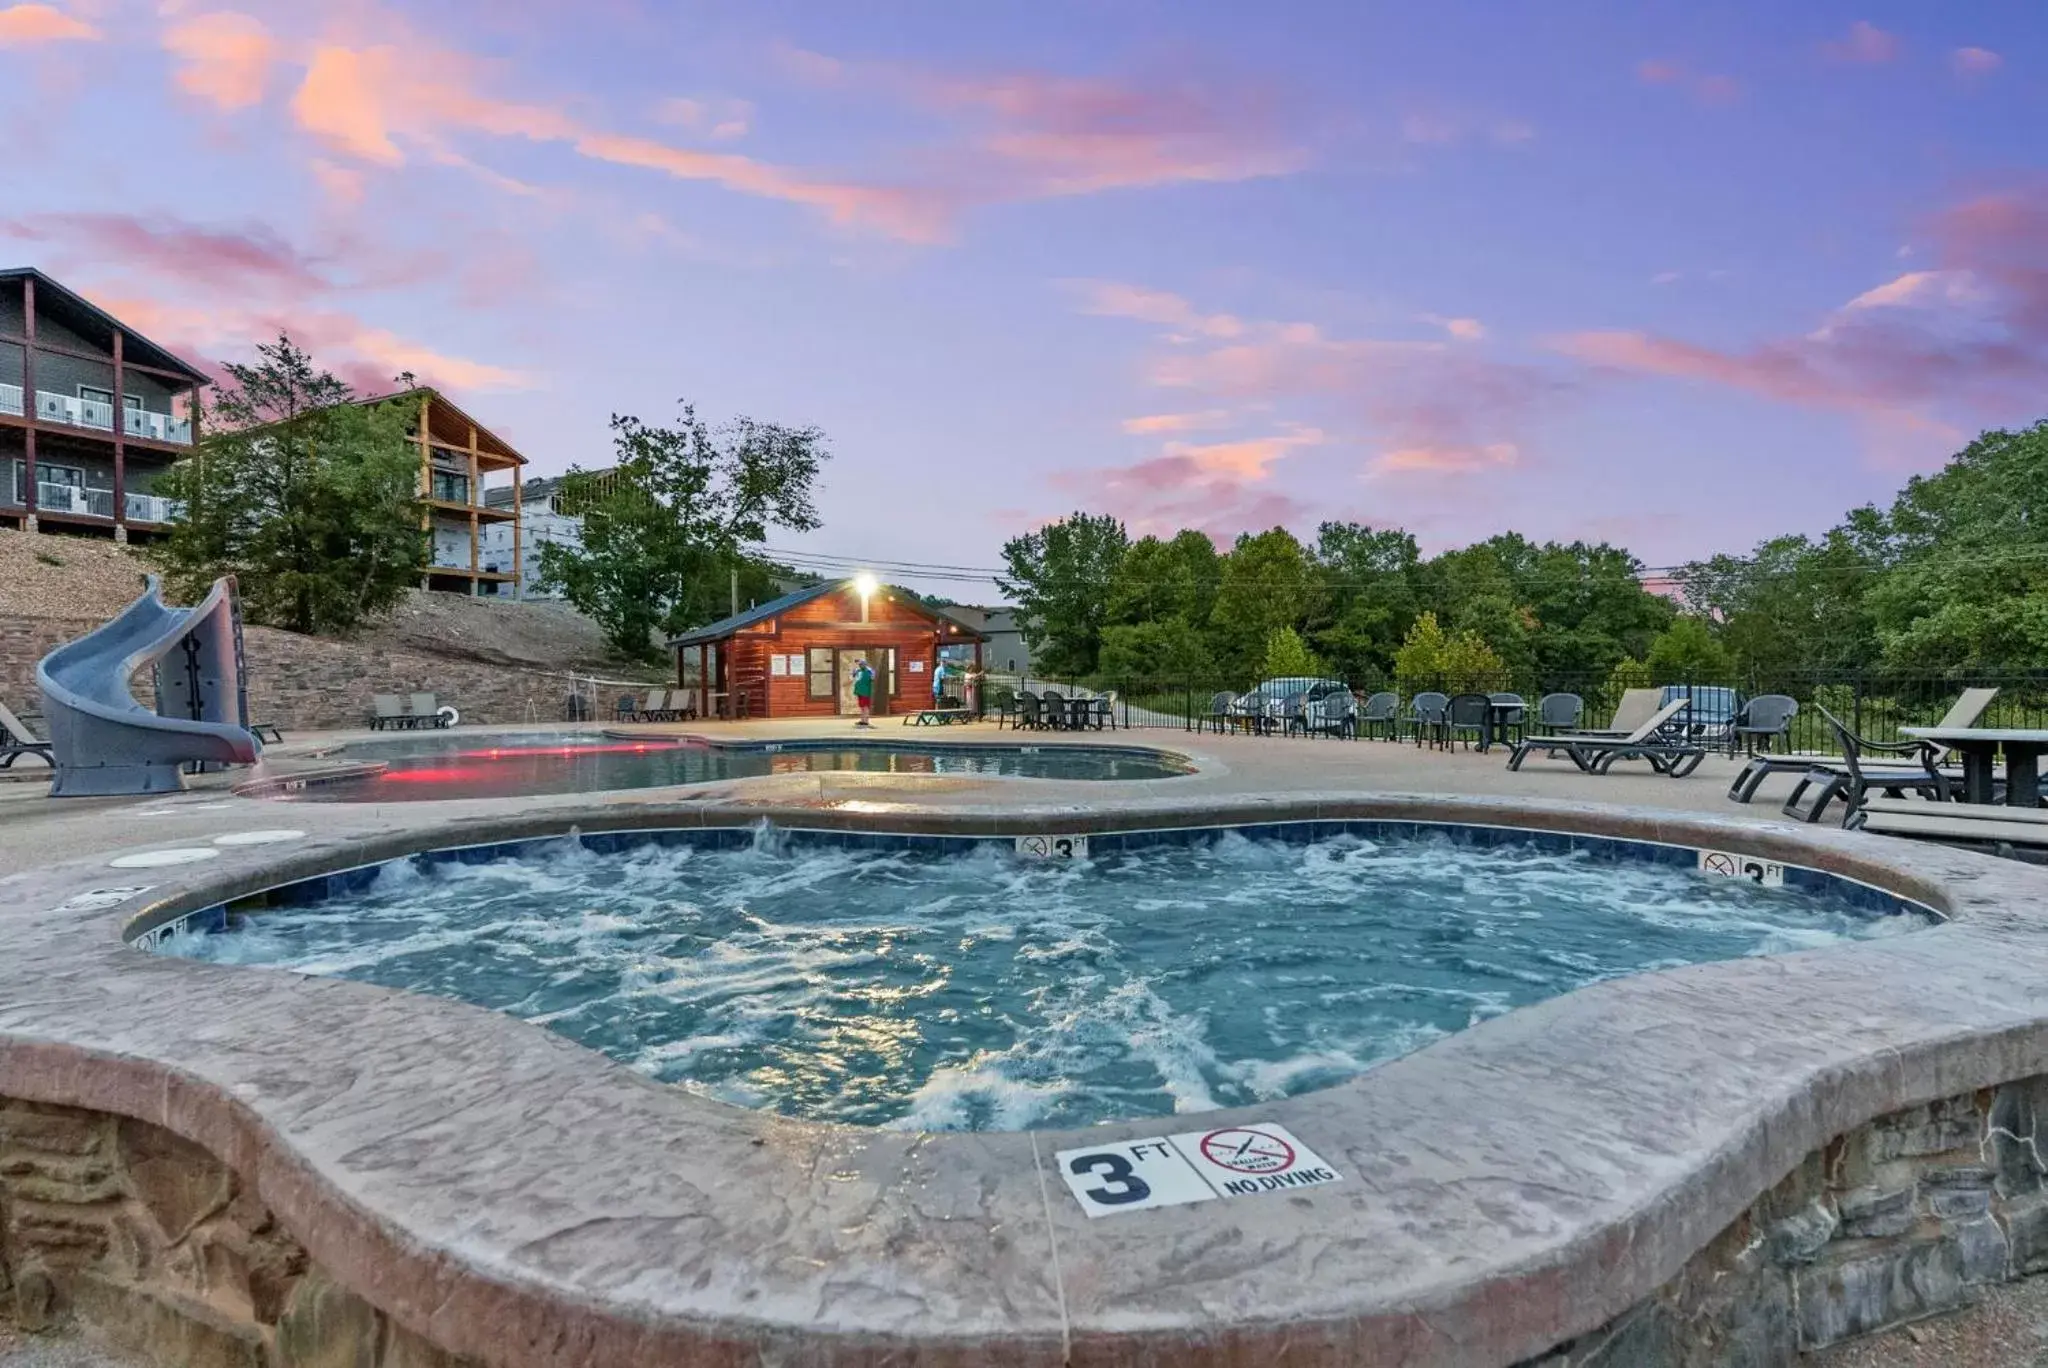 Hot Tub, Swimming Pool in Table Rock Resorts at Indian Point